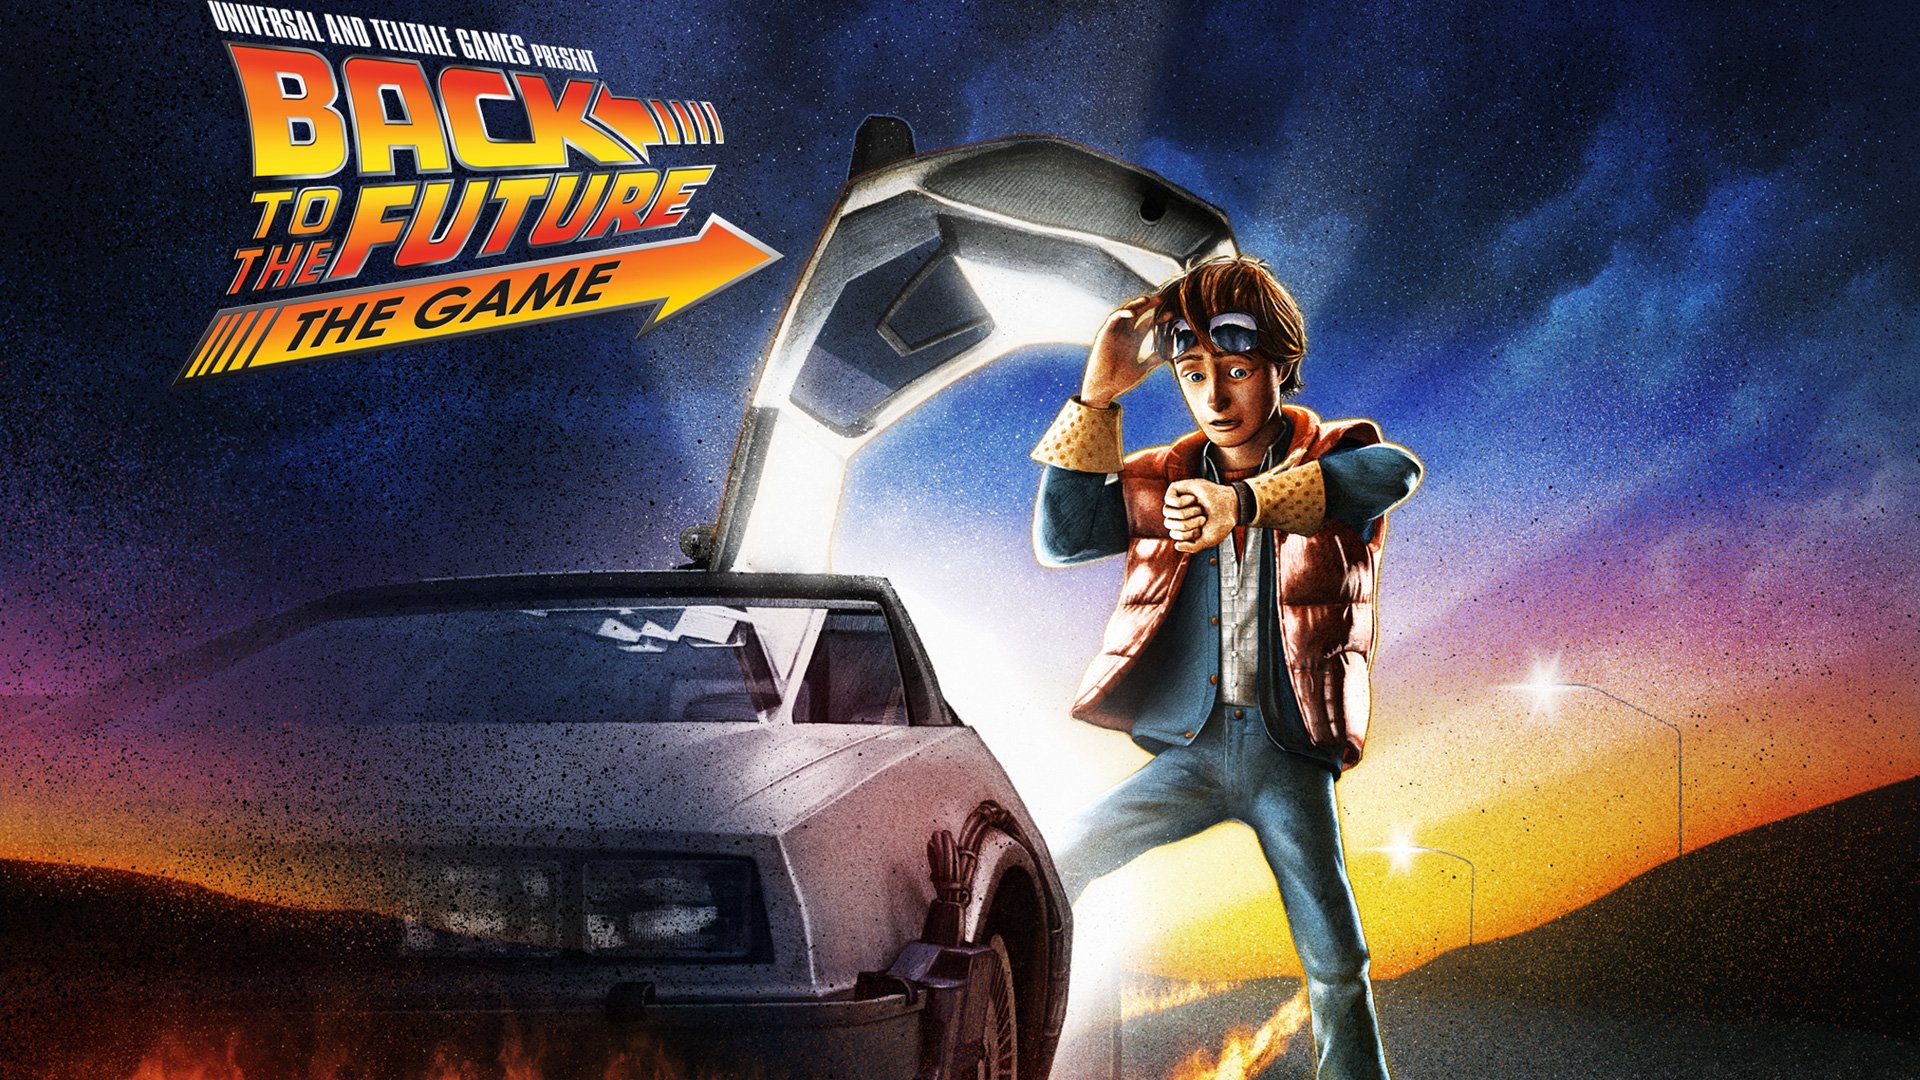 Let’s Play Back to the Future: The Telltale Game